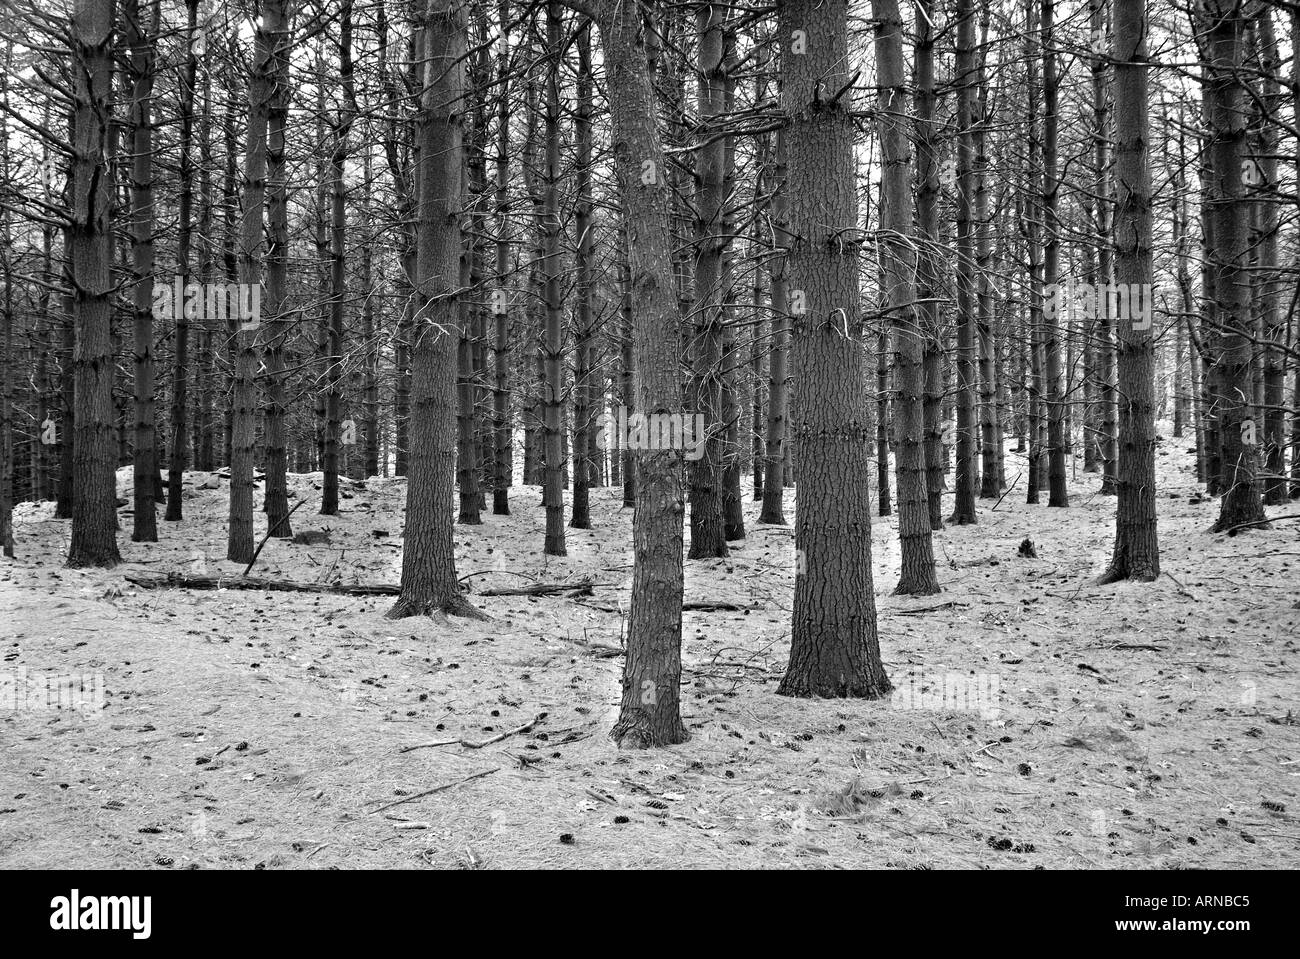 Black and white landscape trees in a forest glen Stock Photo